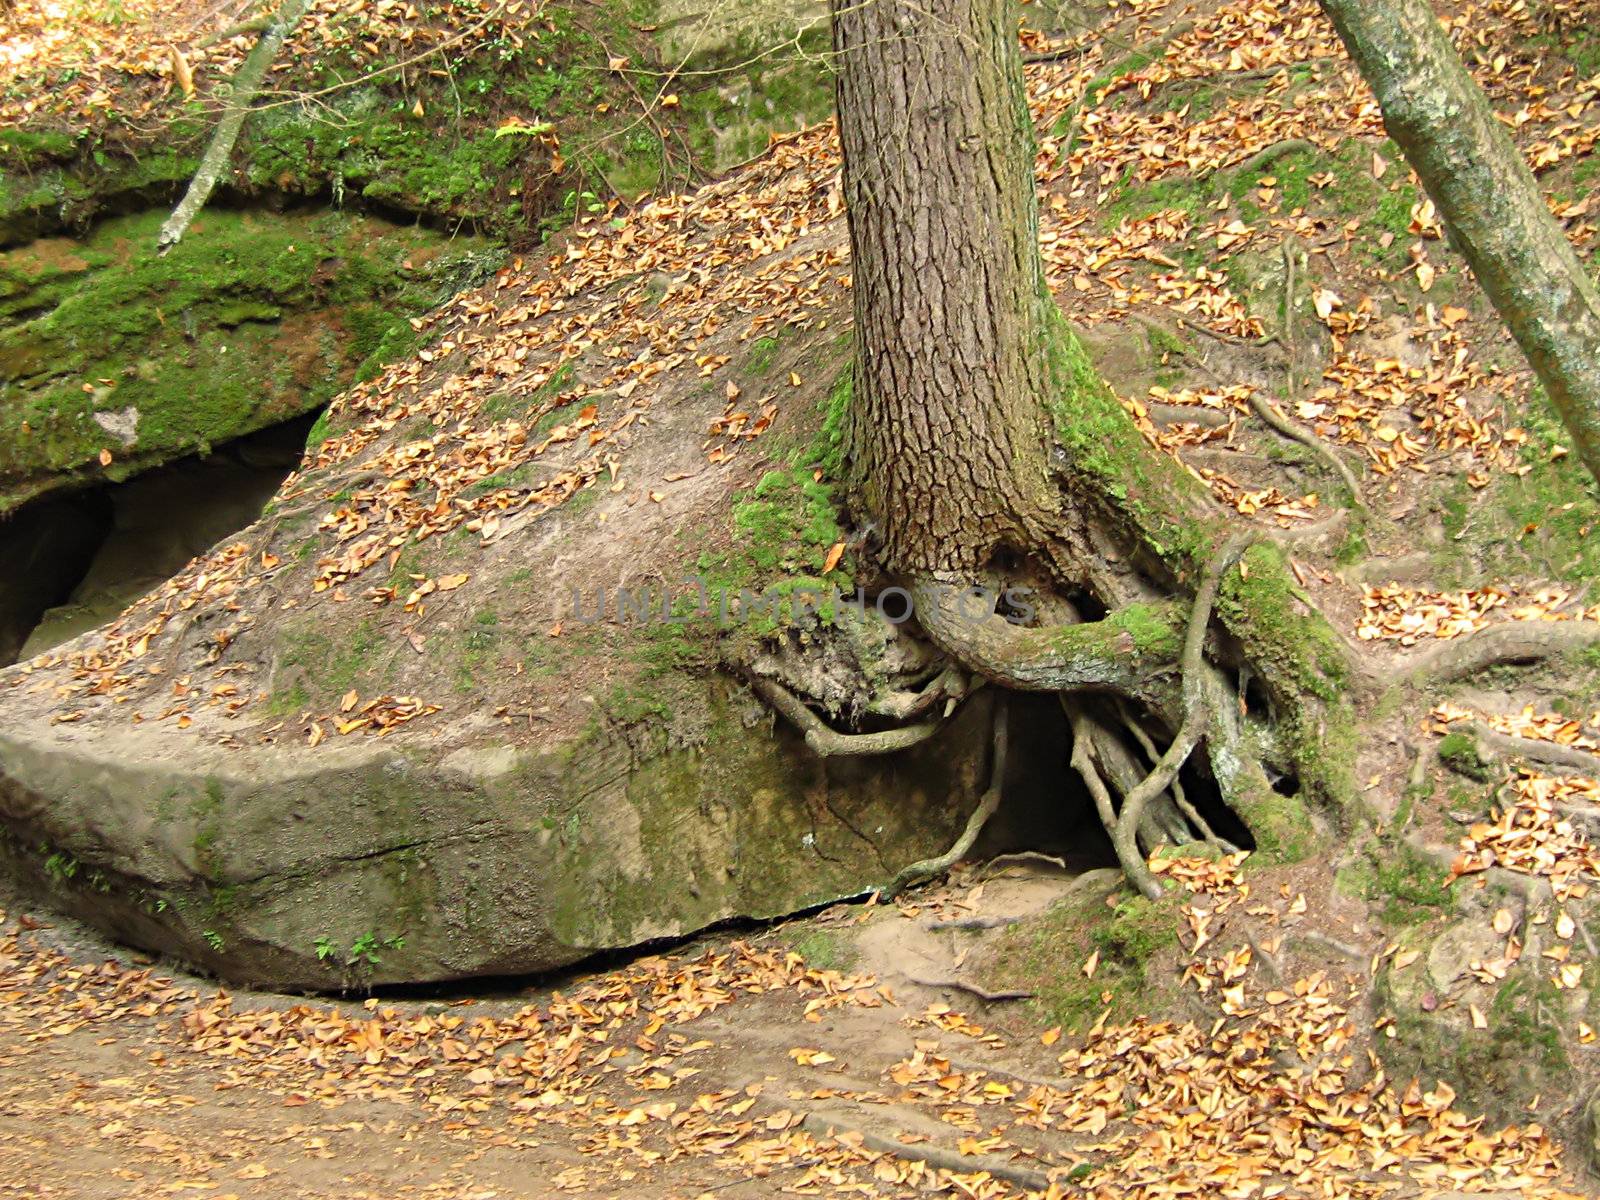 A photograph of tree roots detailing their twisted shape.